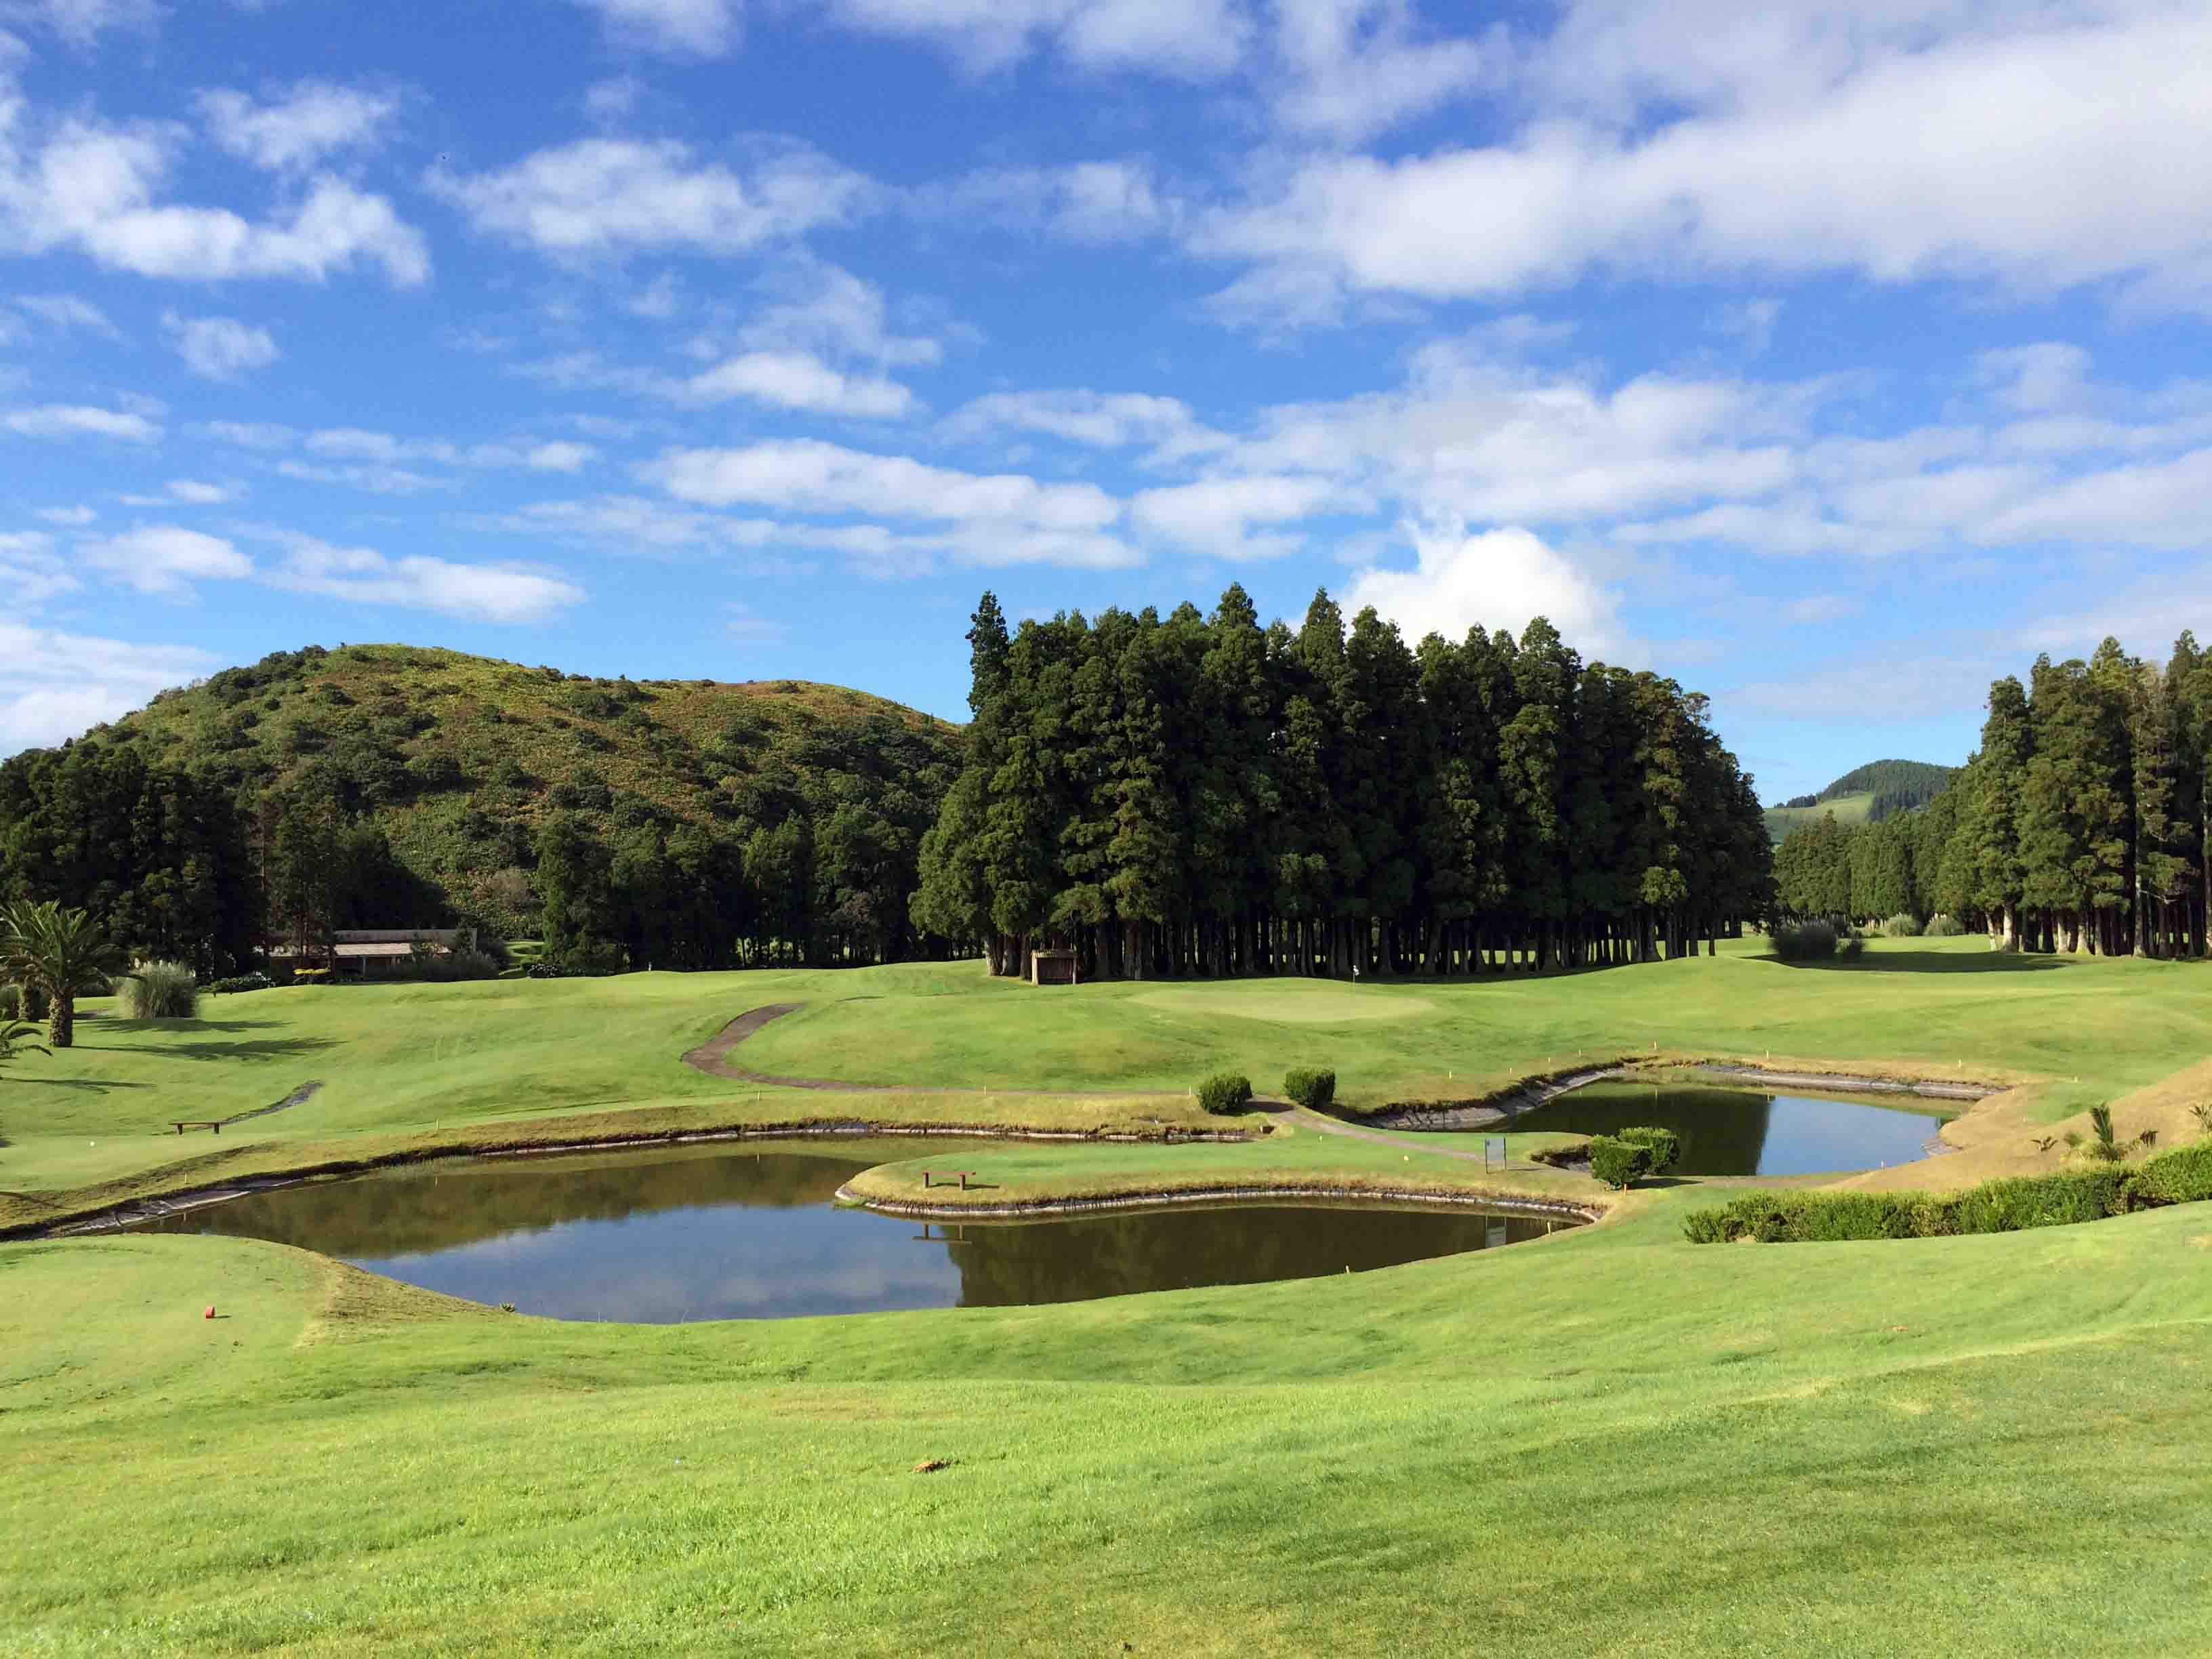 Round at Furnas Golf Course on Azores Islands